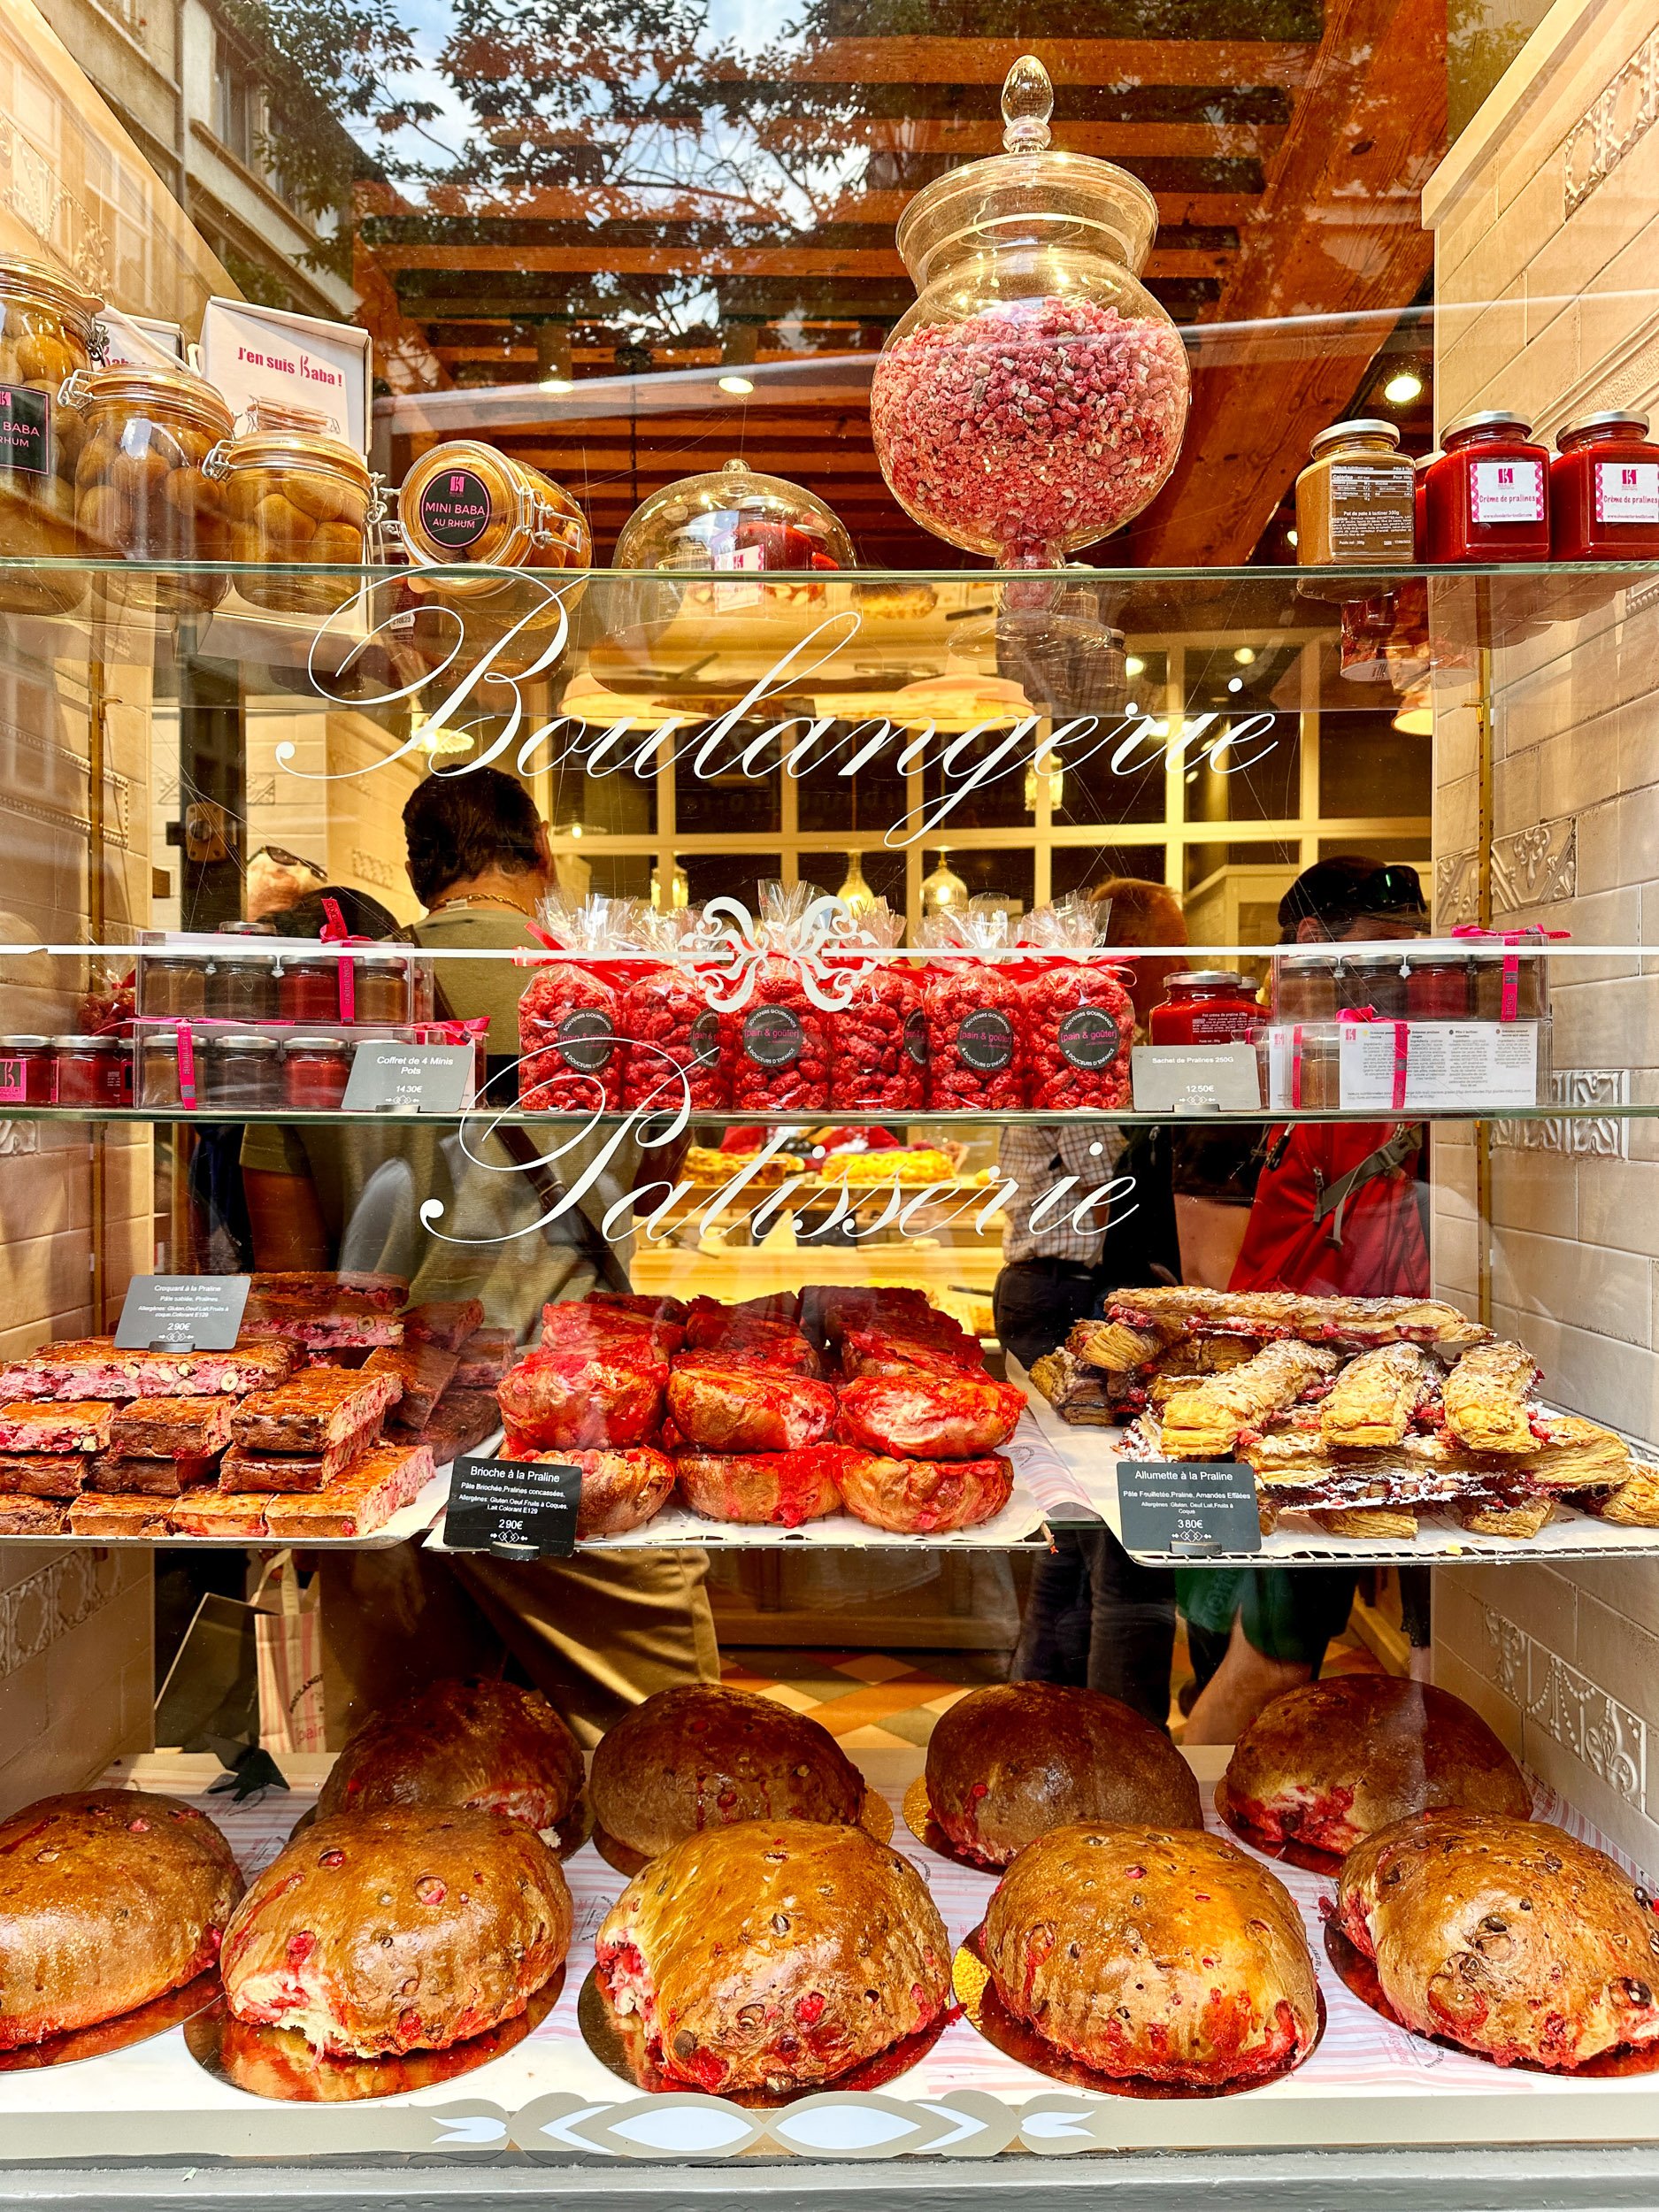 A patisserie window featuring many different pastries including brioches aux pralines roses.